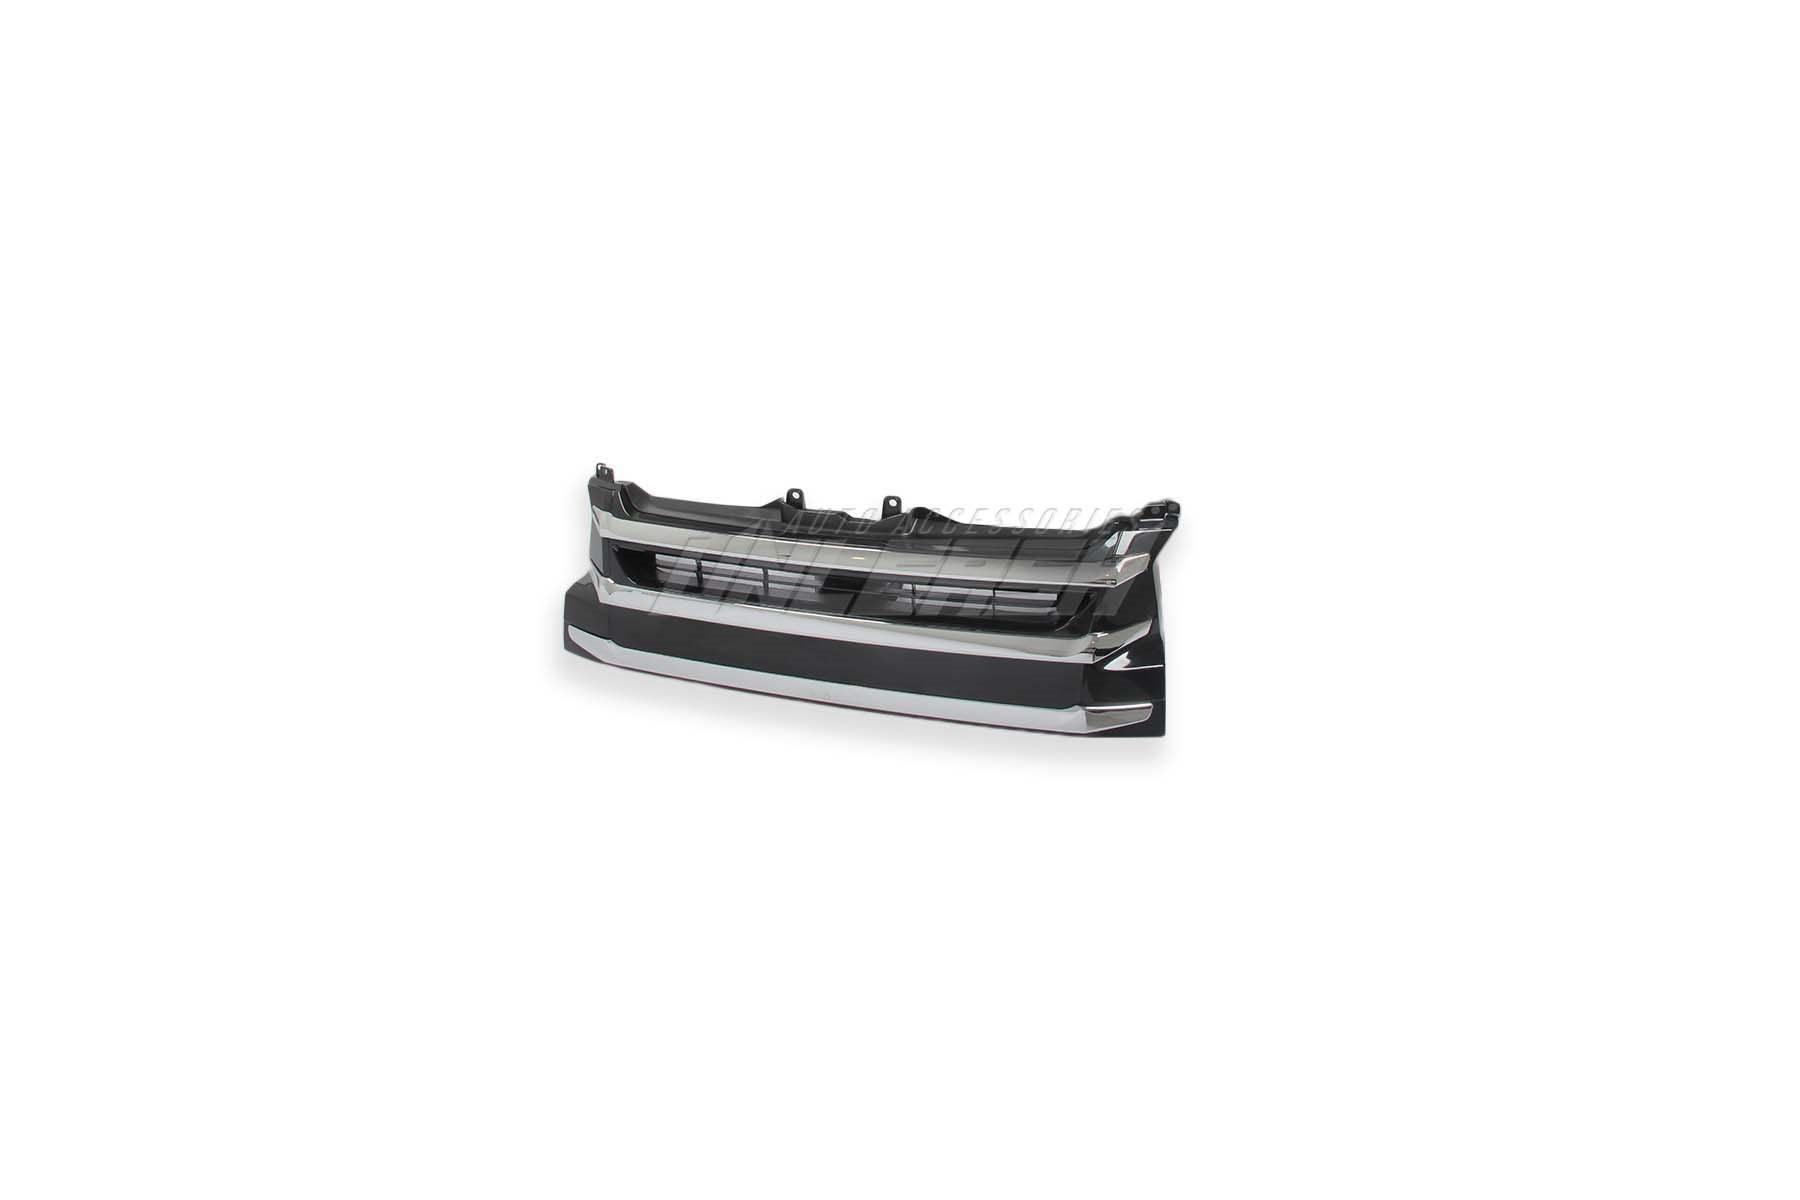 Grille for Toyota Hiace Wide Body 2014- 2019 Model - Prolink Performance